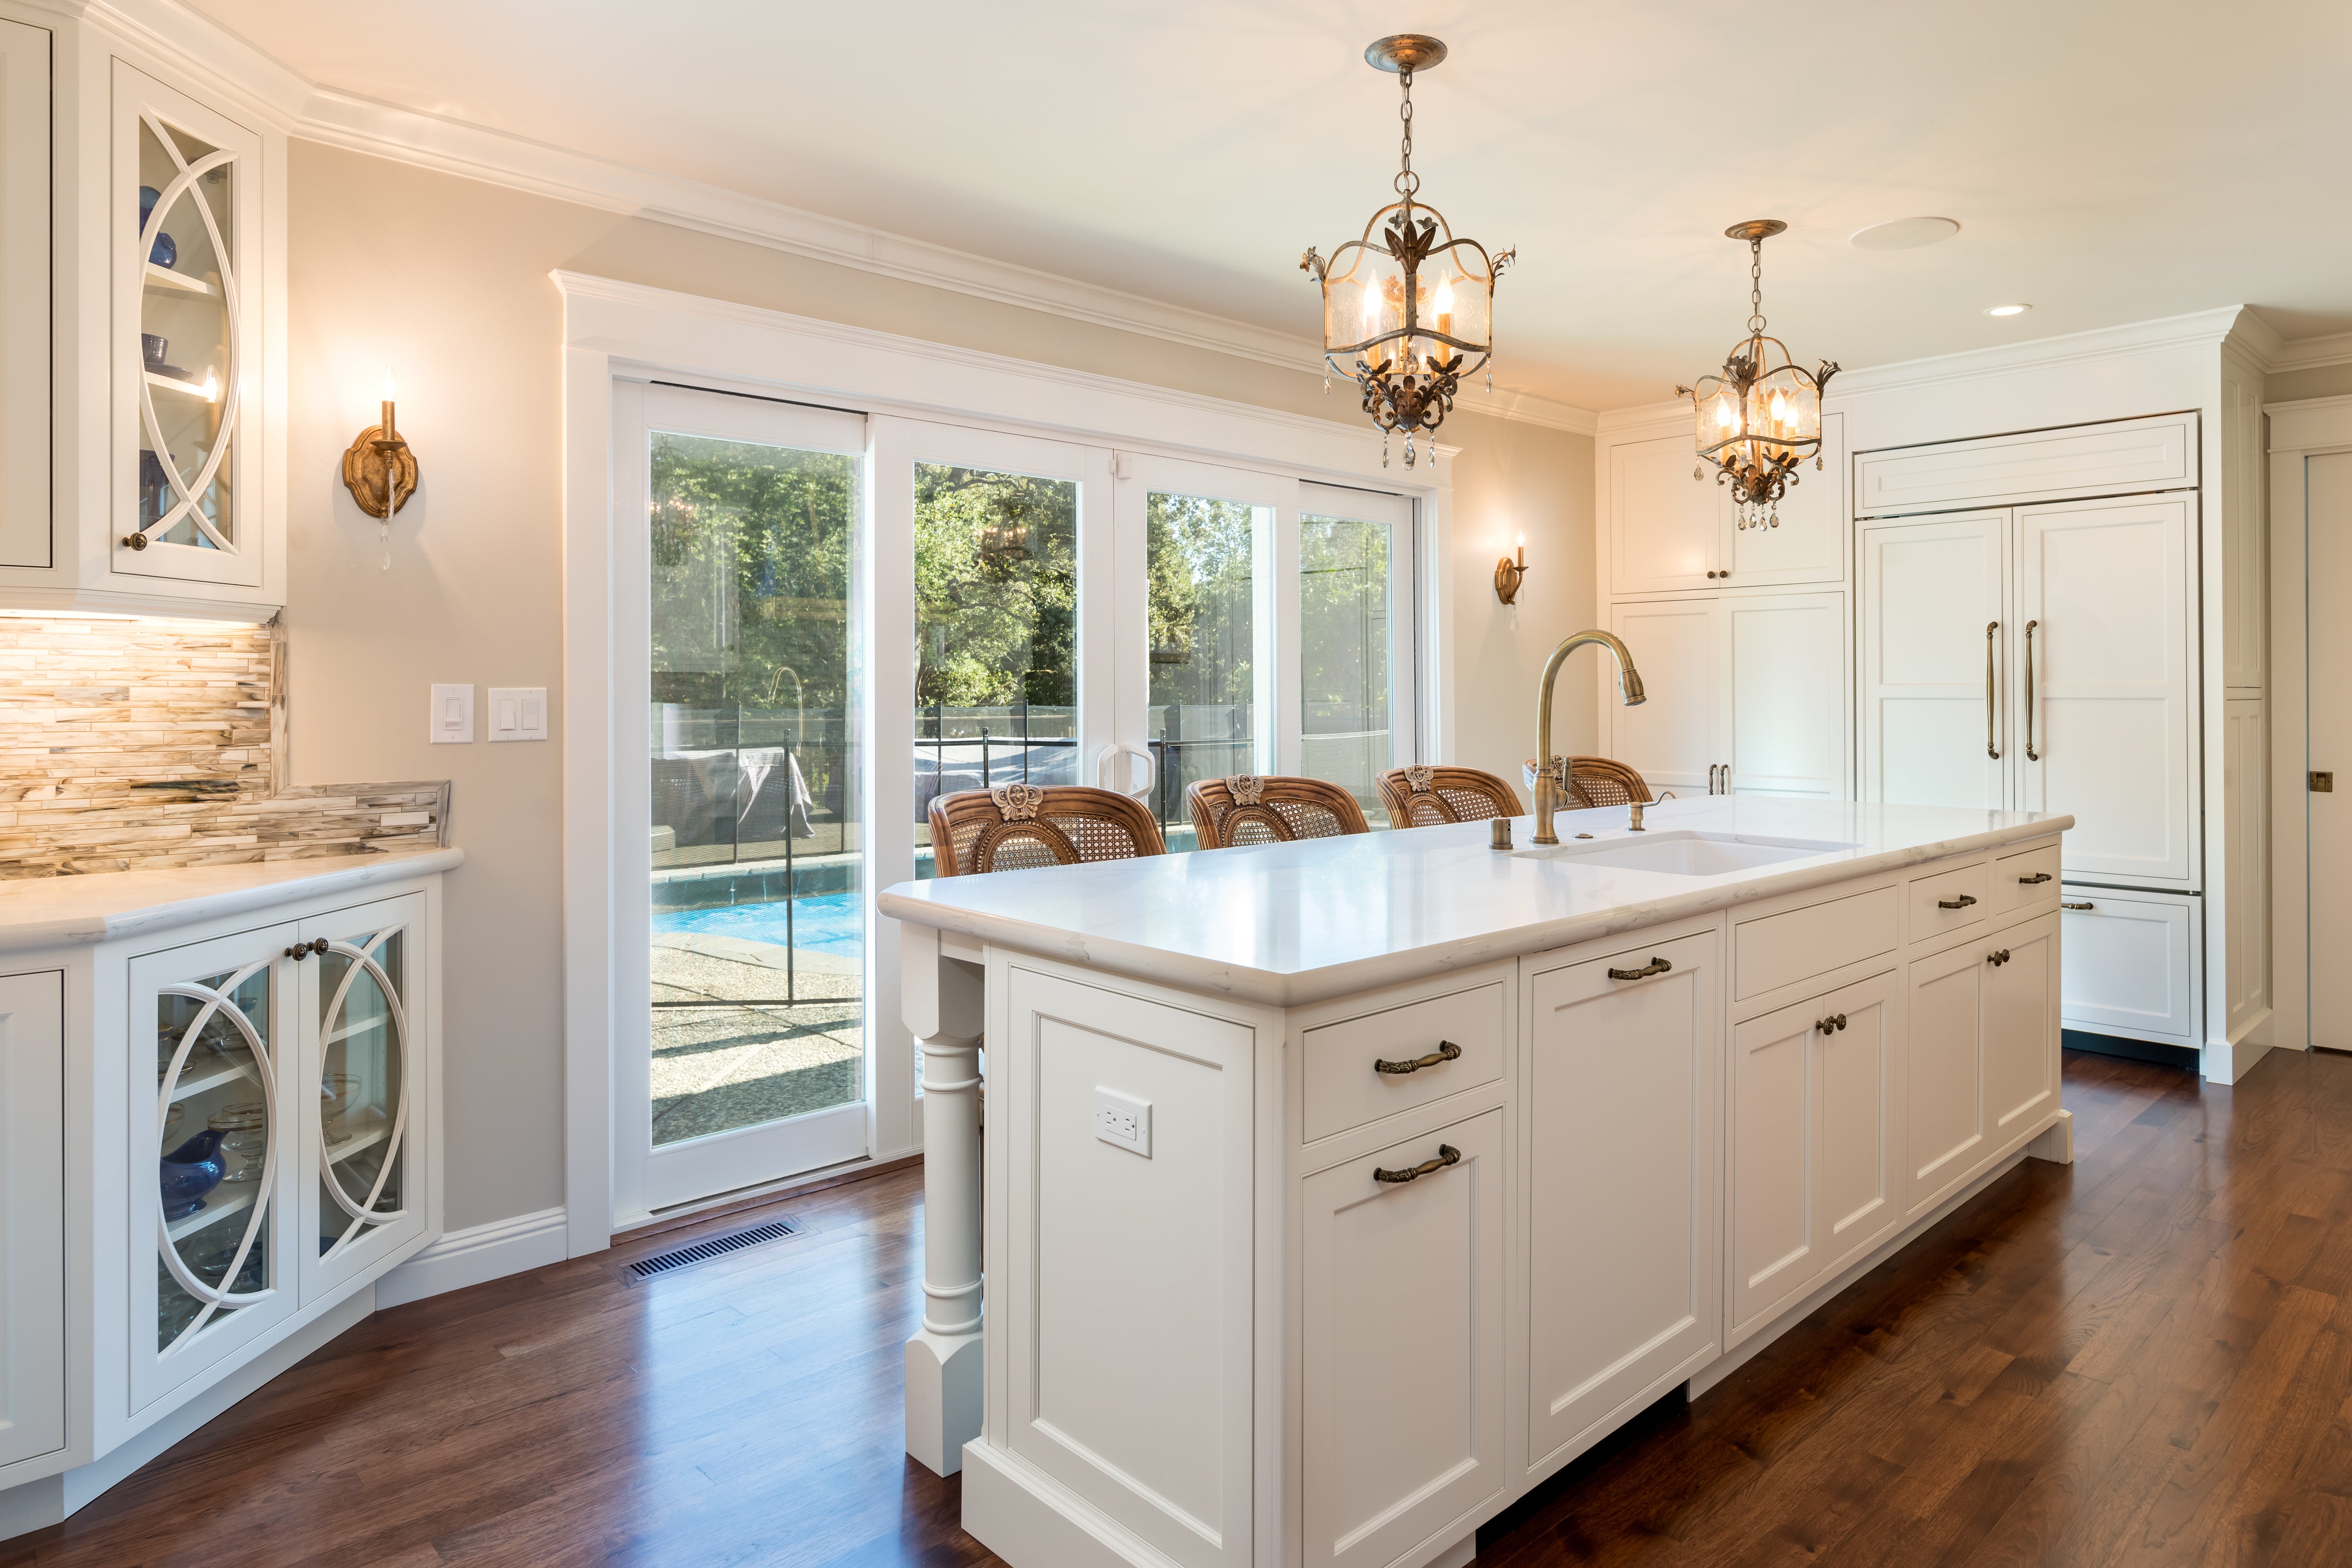 Design by Venue, Jackie Lopey, Moraga Kitchen Remodel - White Cabinets - French Influence